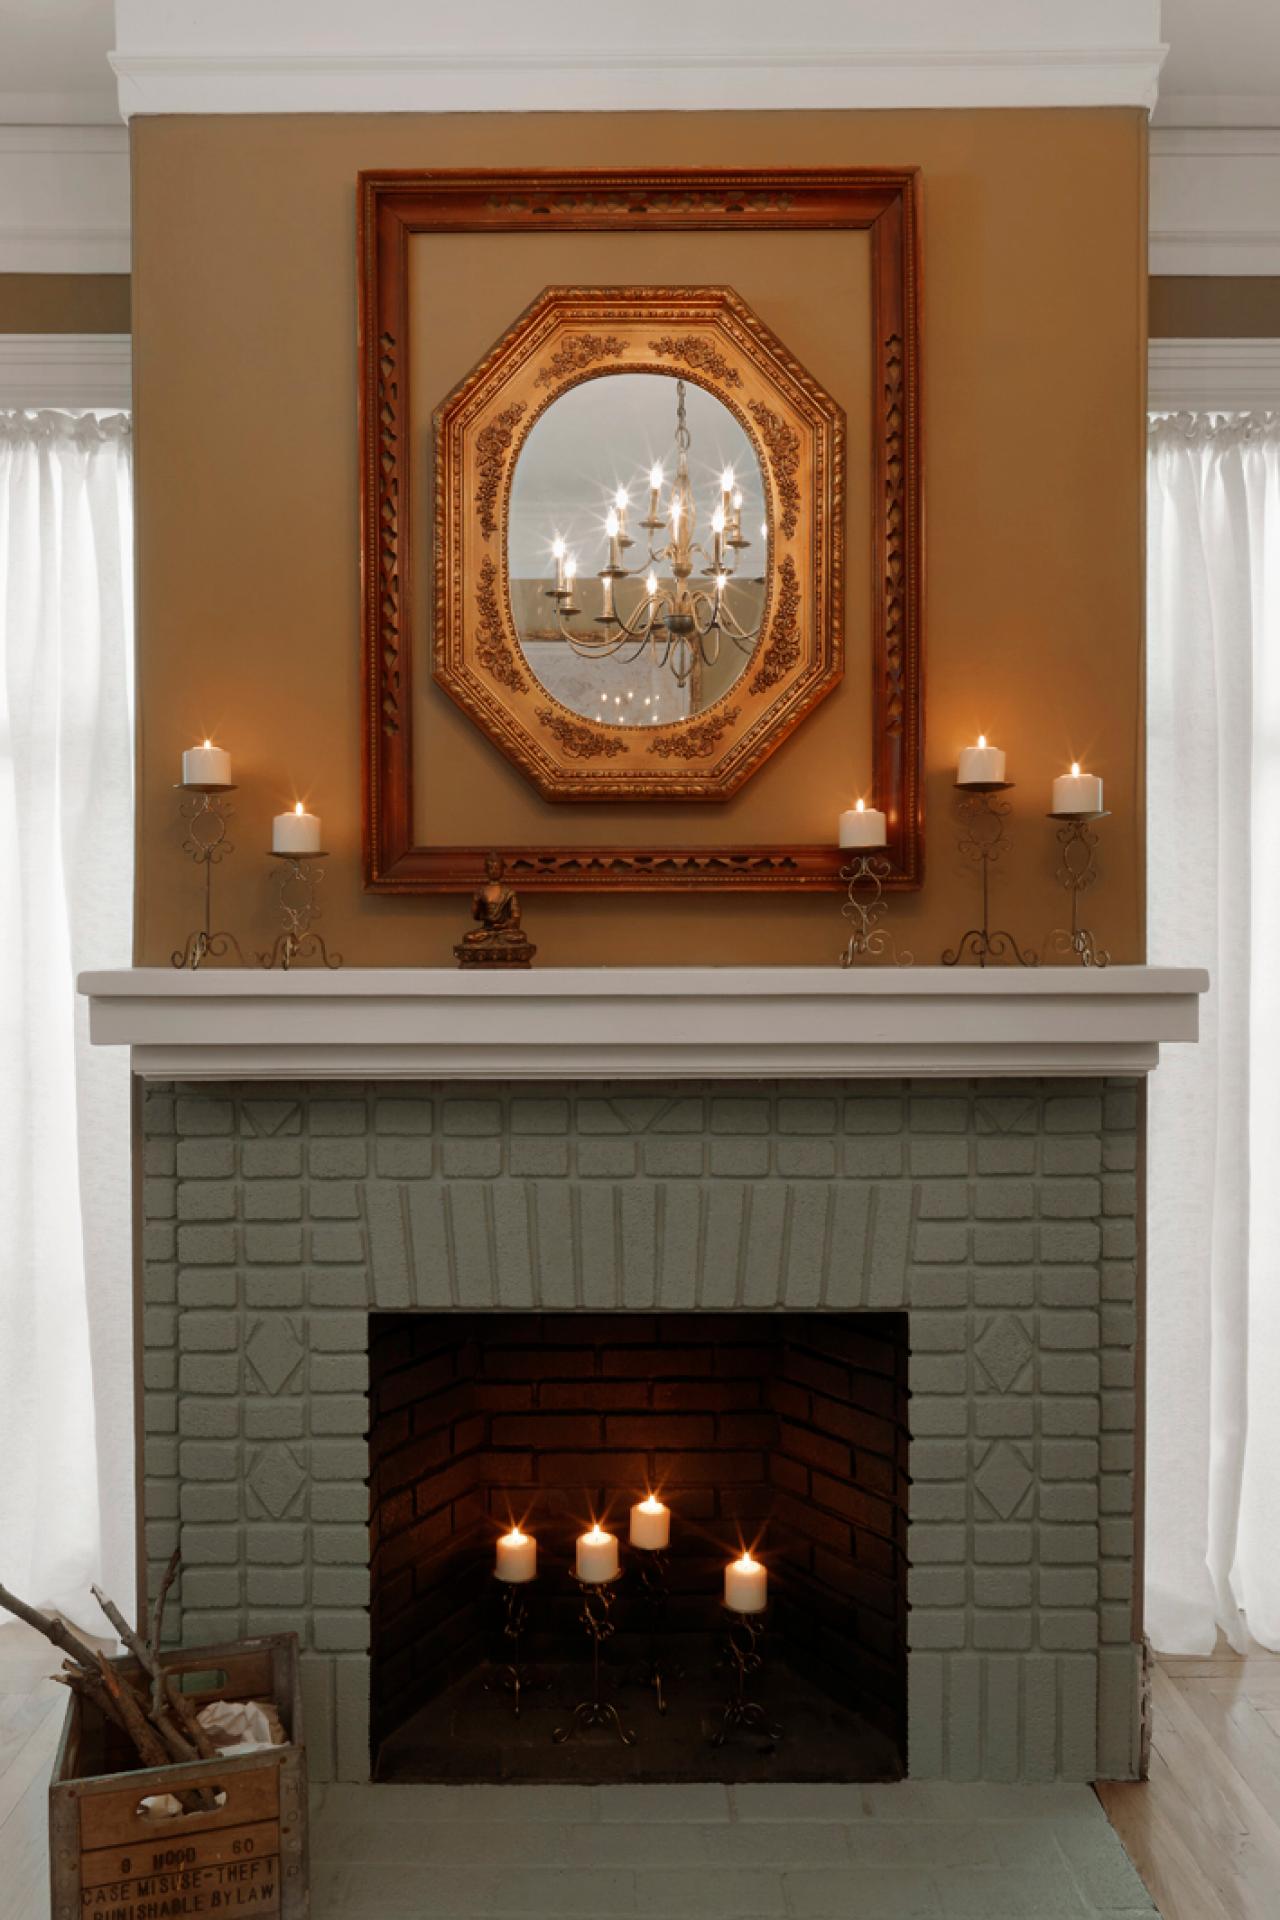 Painted Brick Fireplace Makeover How, Spray Paint Fireplace Brick